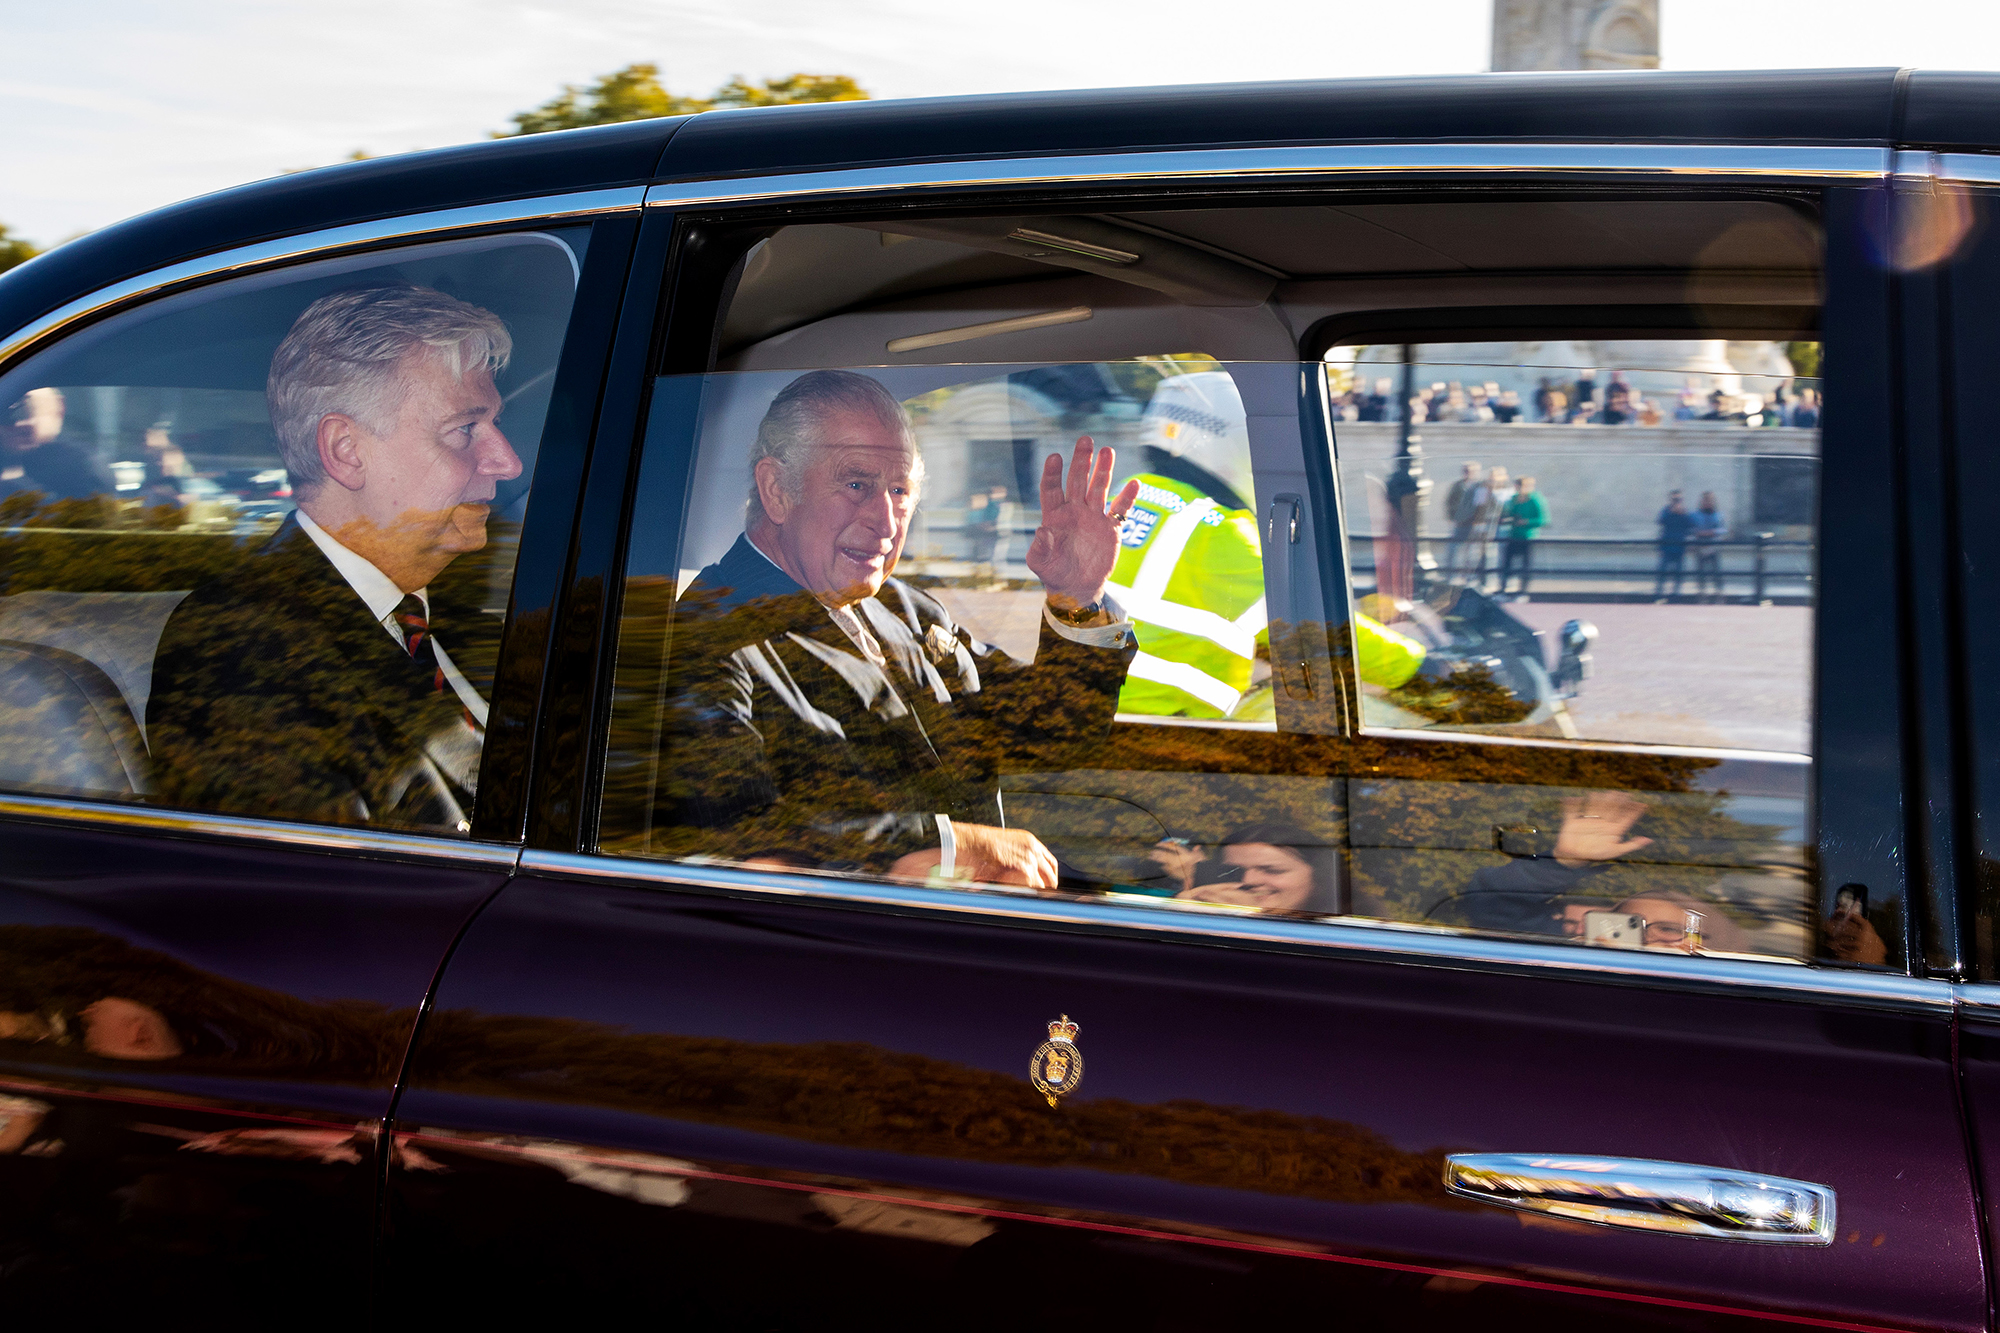 King Charles III arrives at Buckingham Palace ahead of his audiences with outgoing British Prime Minister Liz Truss and incoming leader Rishi Sunak on Tuesday.